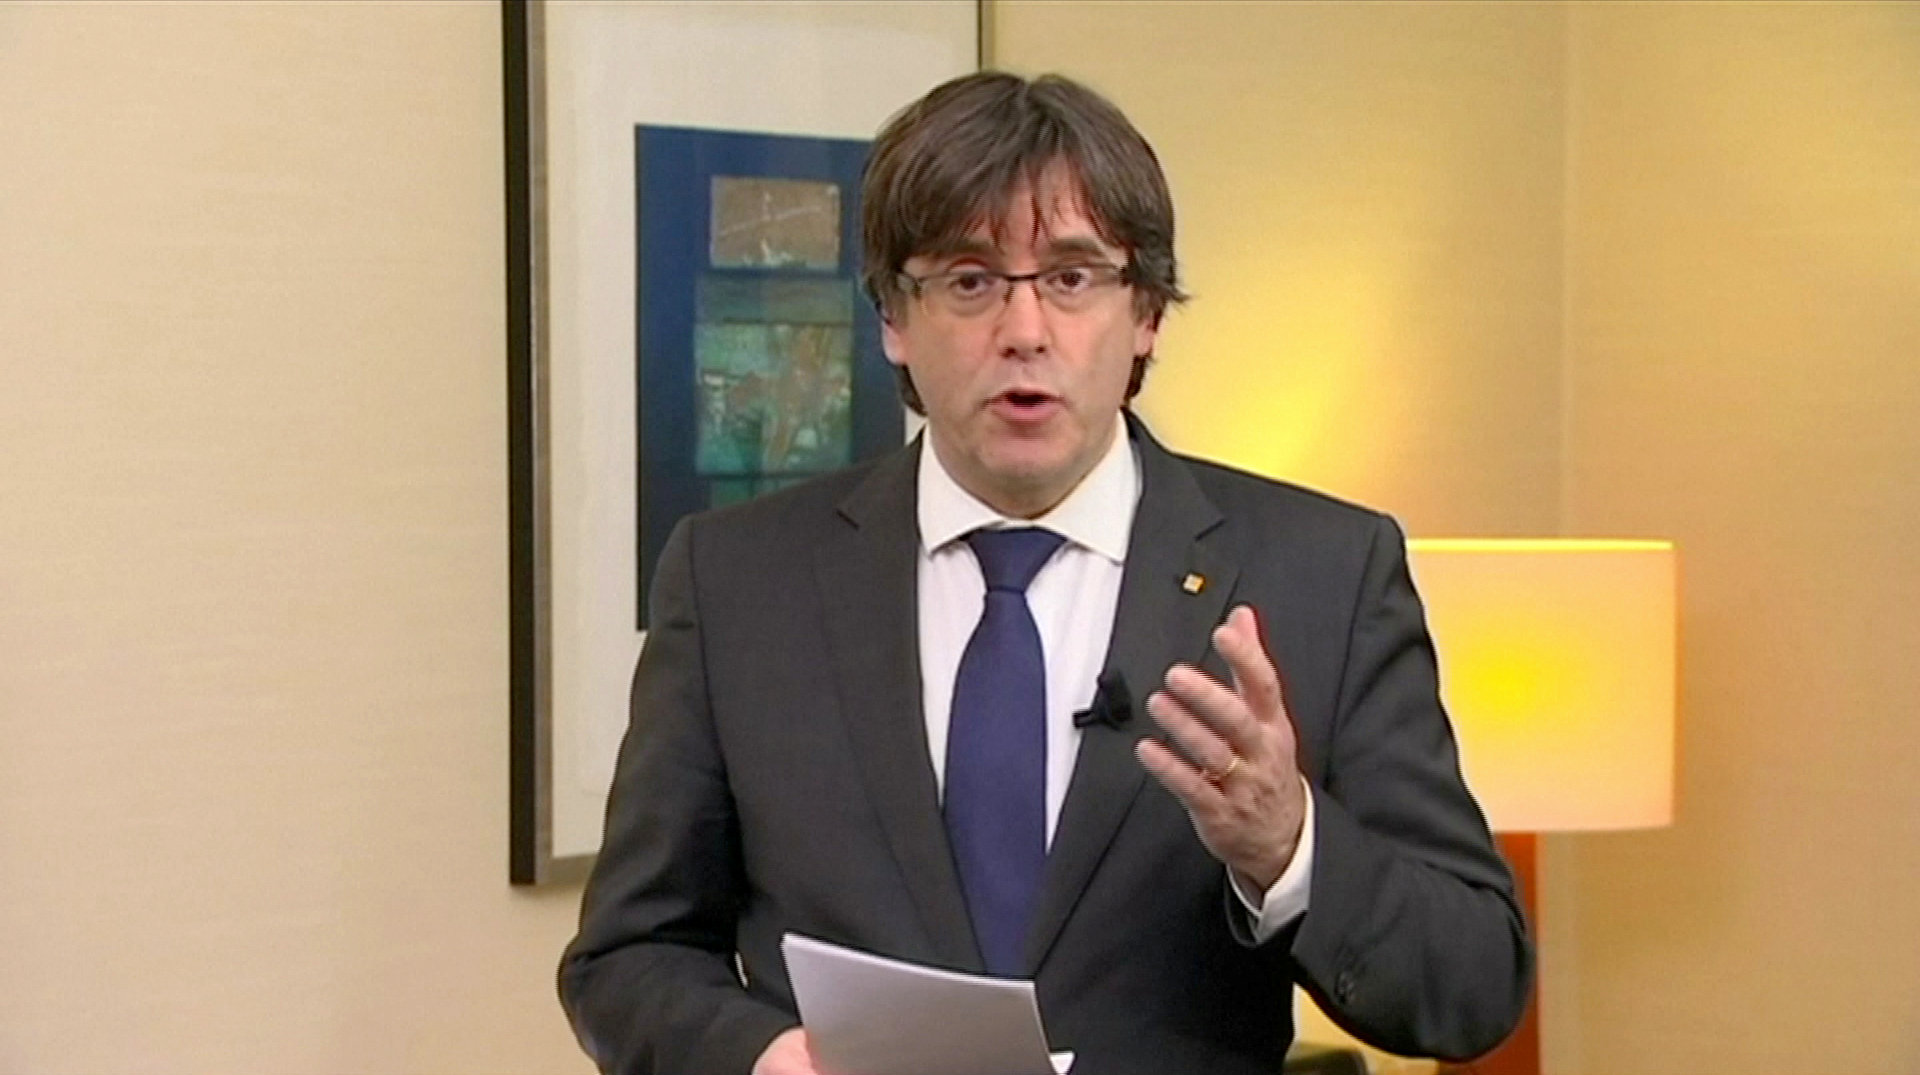 Sacked Catalonia leader turns self in; polls show secessionists getting most seats in election